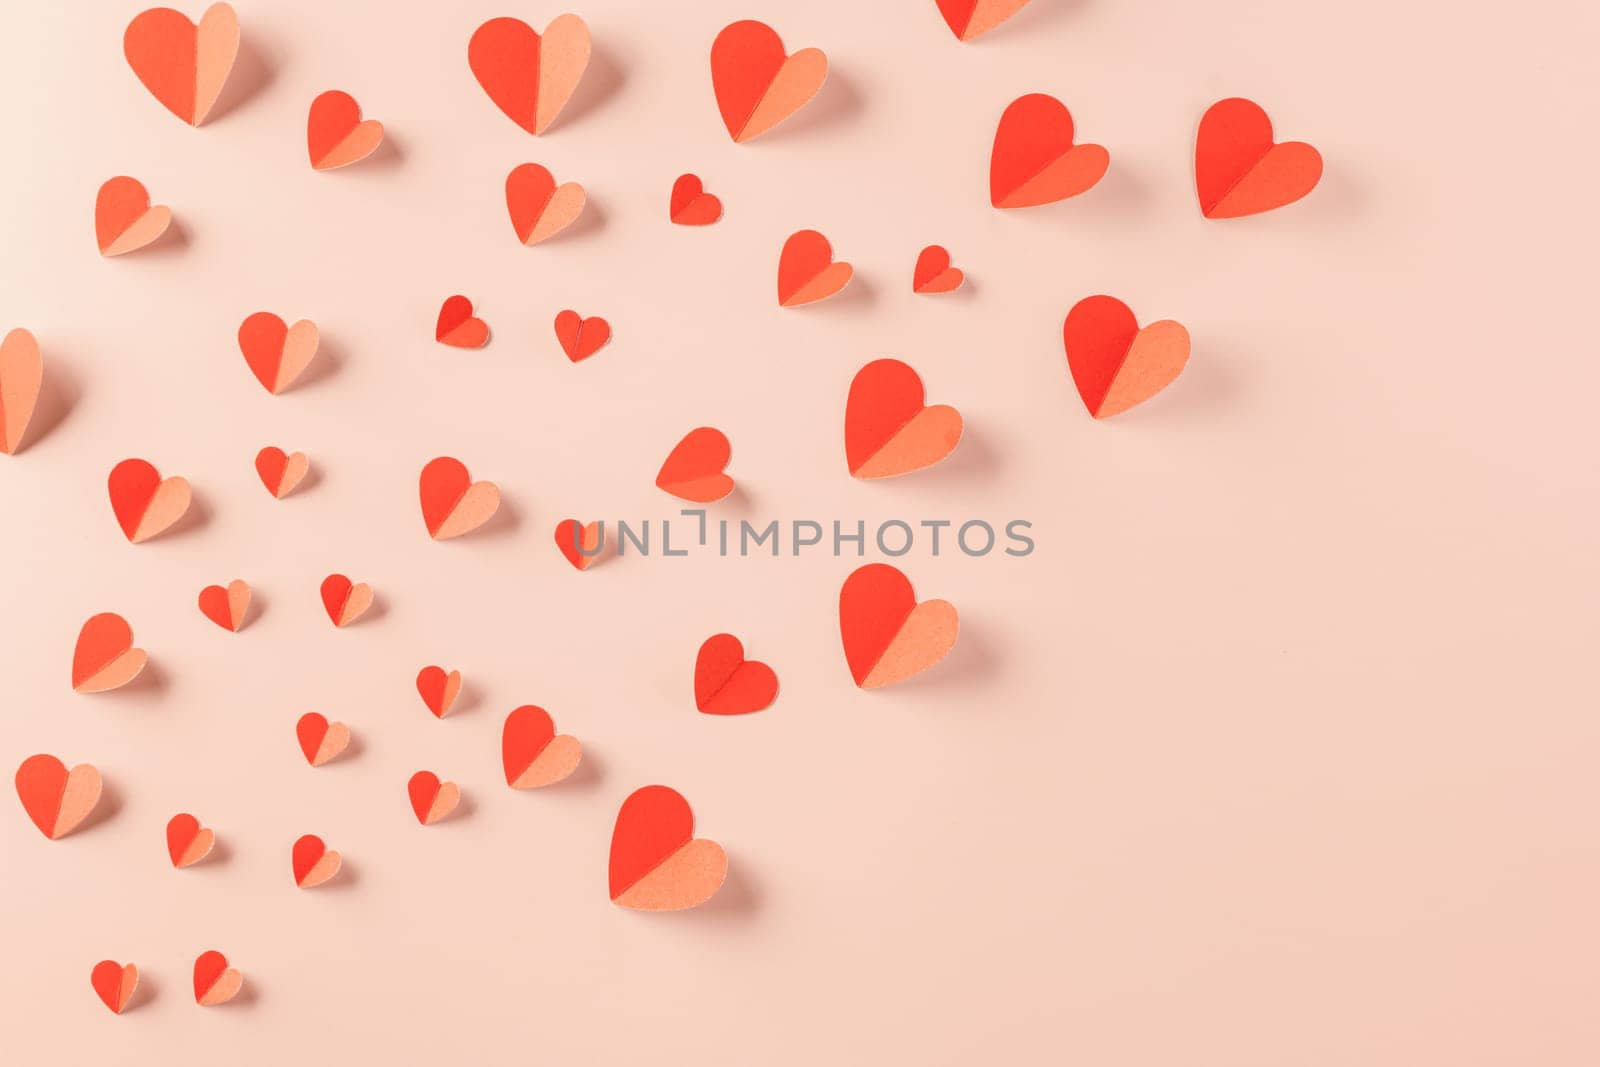 Happy Valentine's day concept. Red paper hearts cutting pastel pink background, Symbol of love paper art with copy space for text, Mother's Day